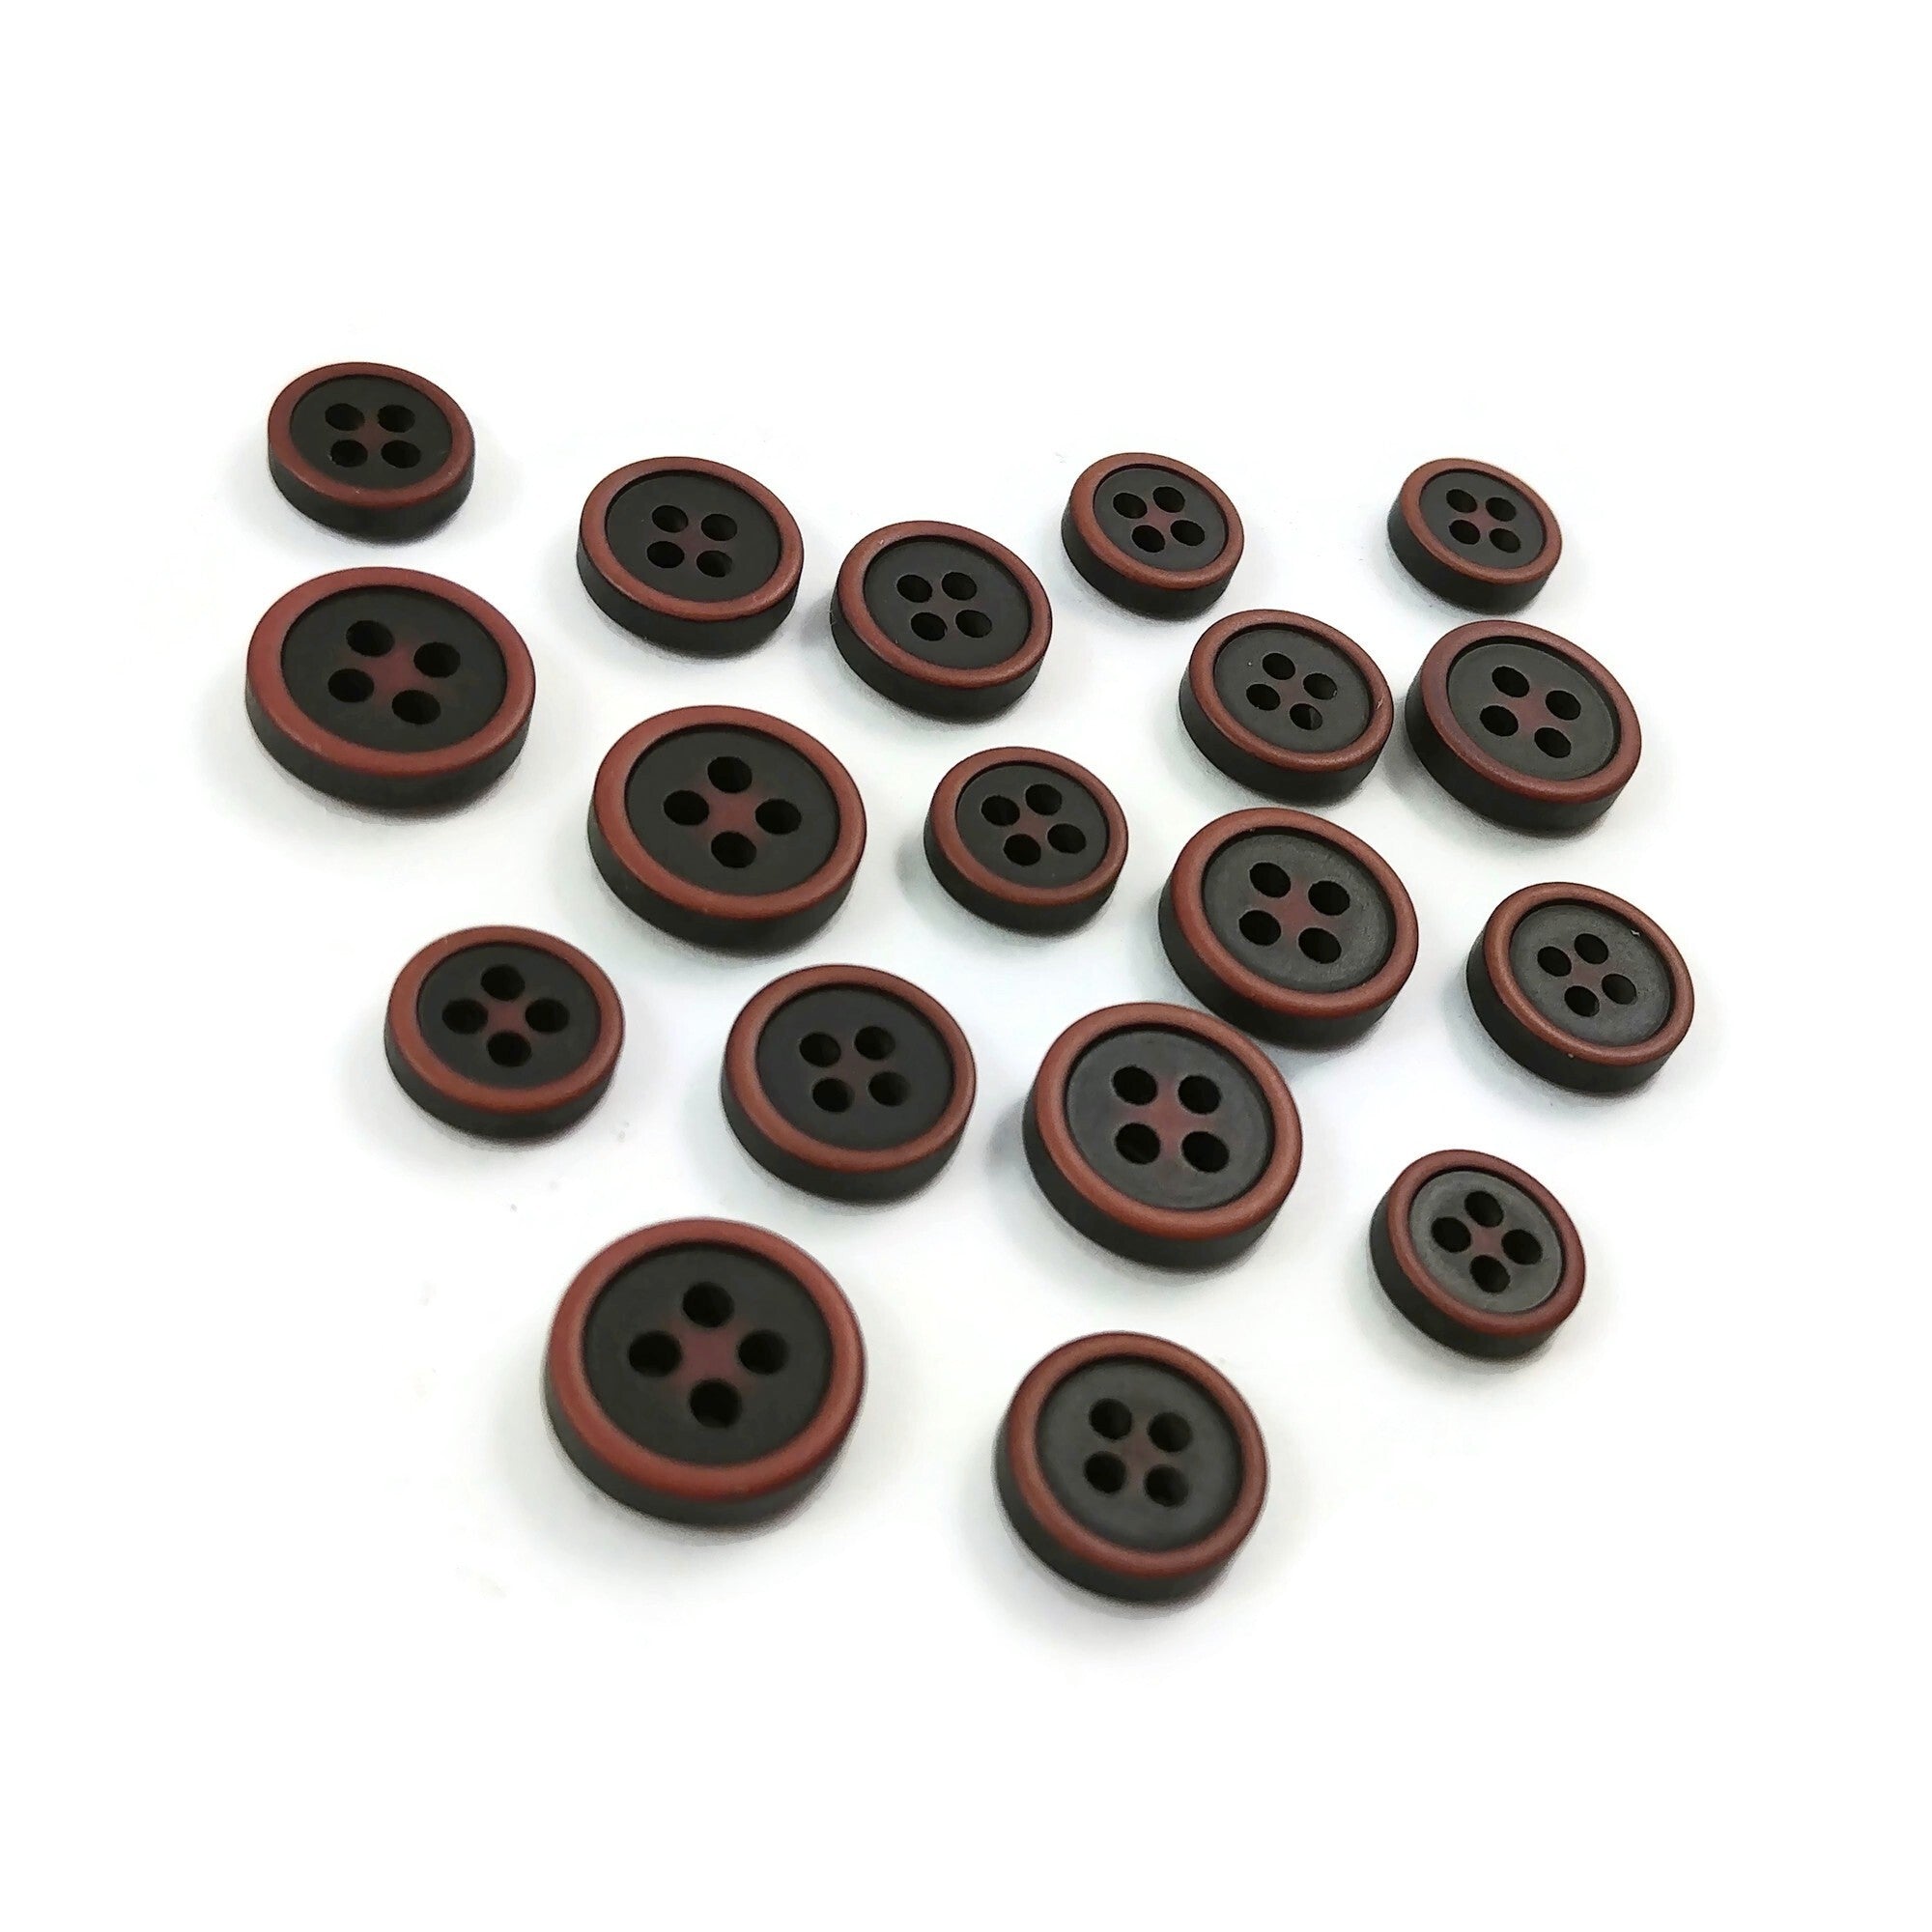 Resin and plastic sewing buttons